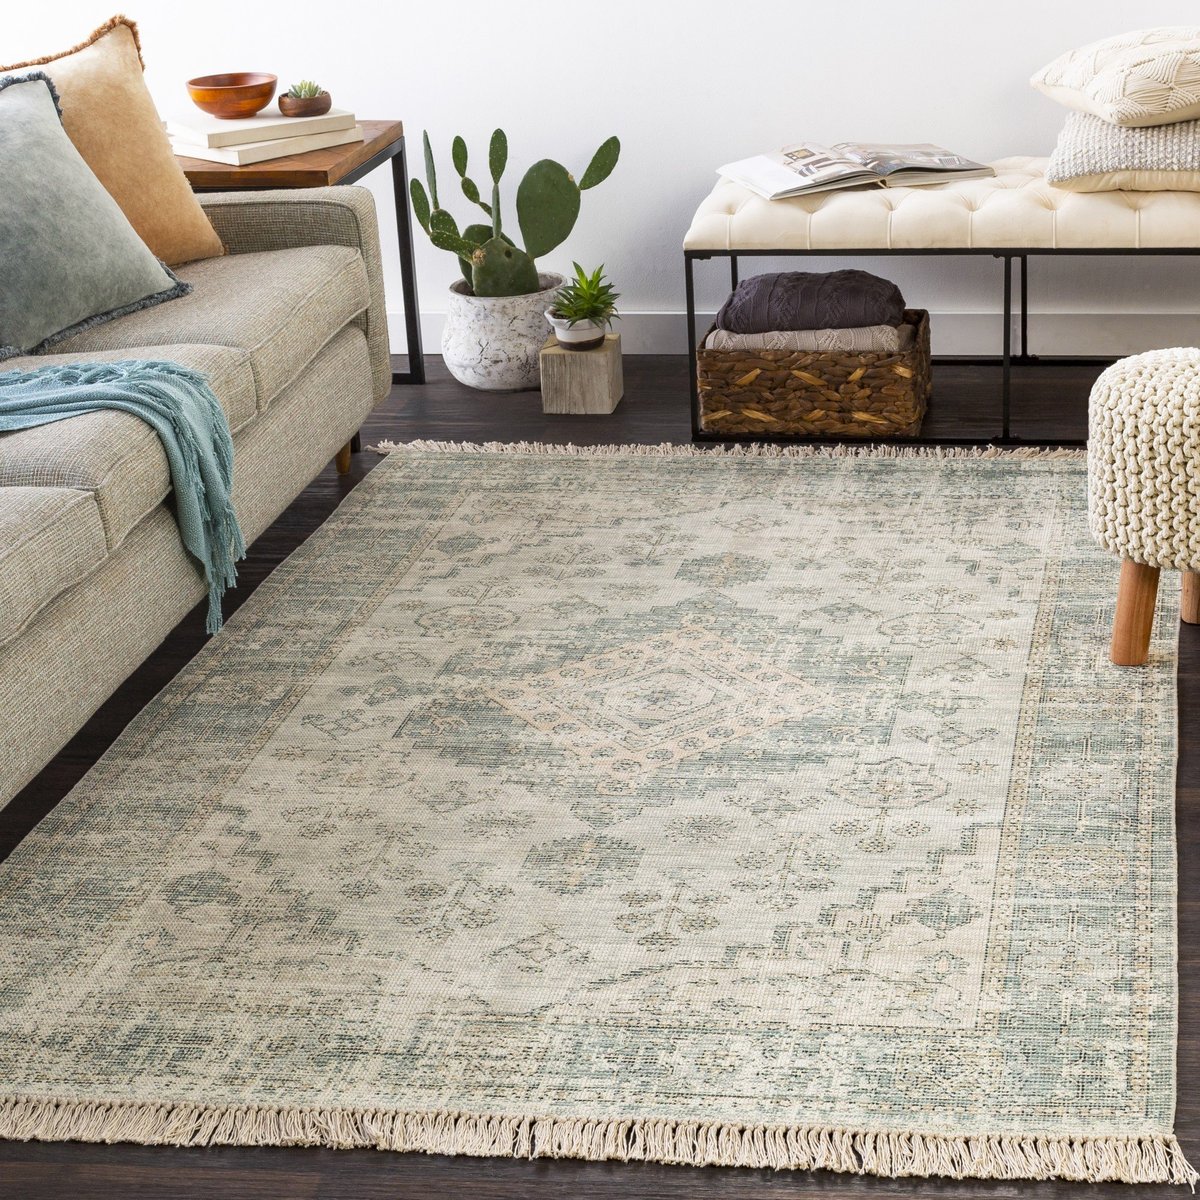 What To Do When You Can't Afford Joanna's Rugs - Farmhouse Made